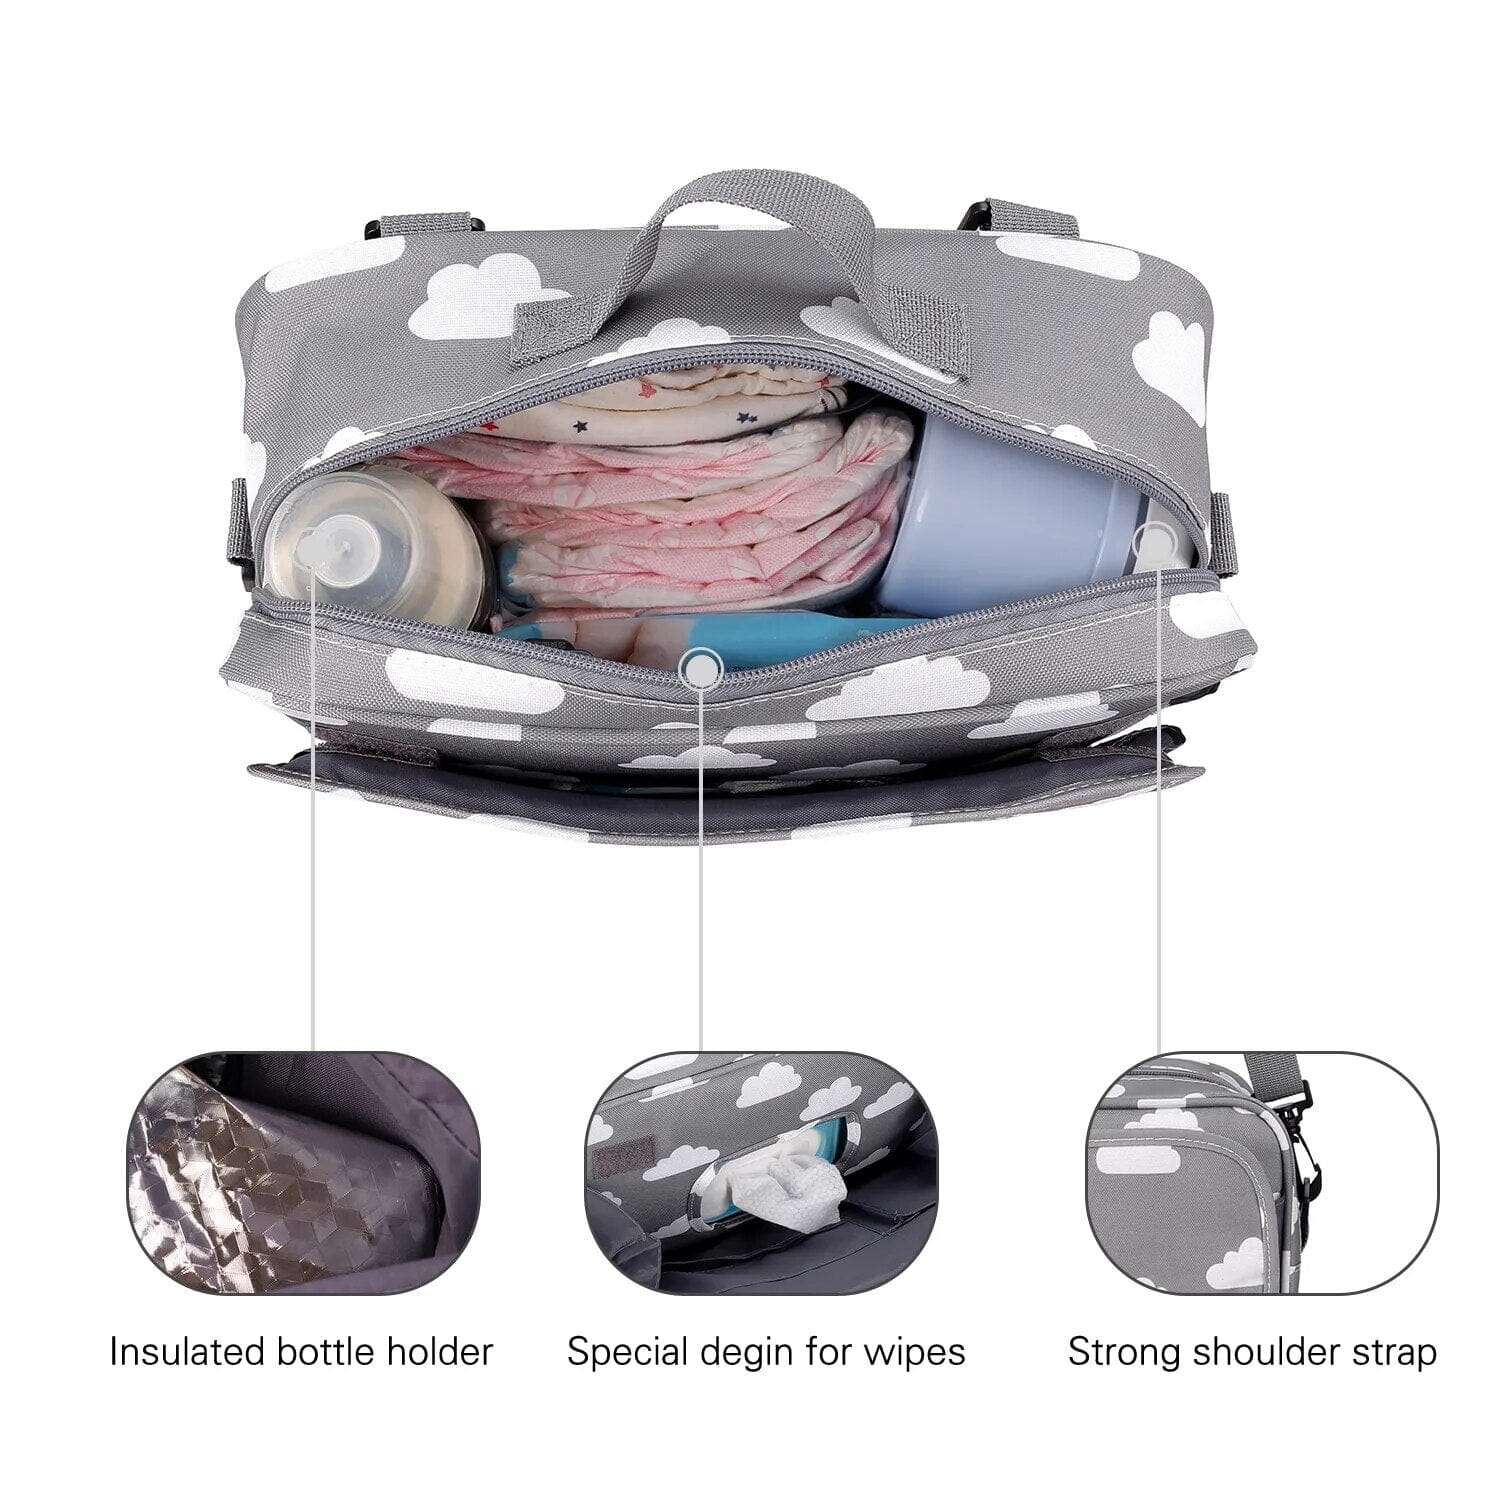 New Style Waterproof Diaper Bag Large Capacity Mommy Travel Bag Multifunctional Maternity Mother Baby Stroller Bags Organizer Baby Bubble Store 